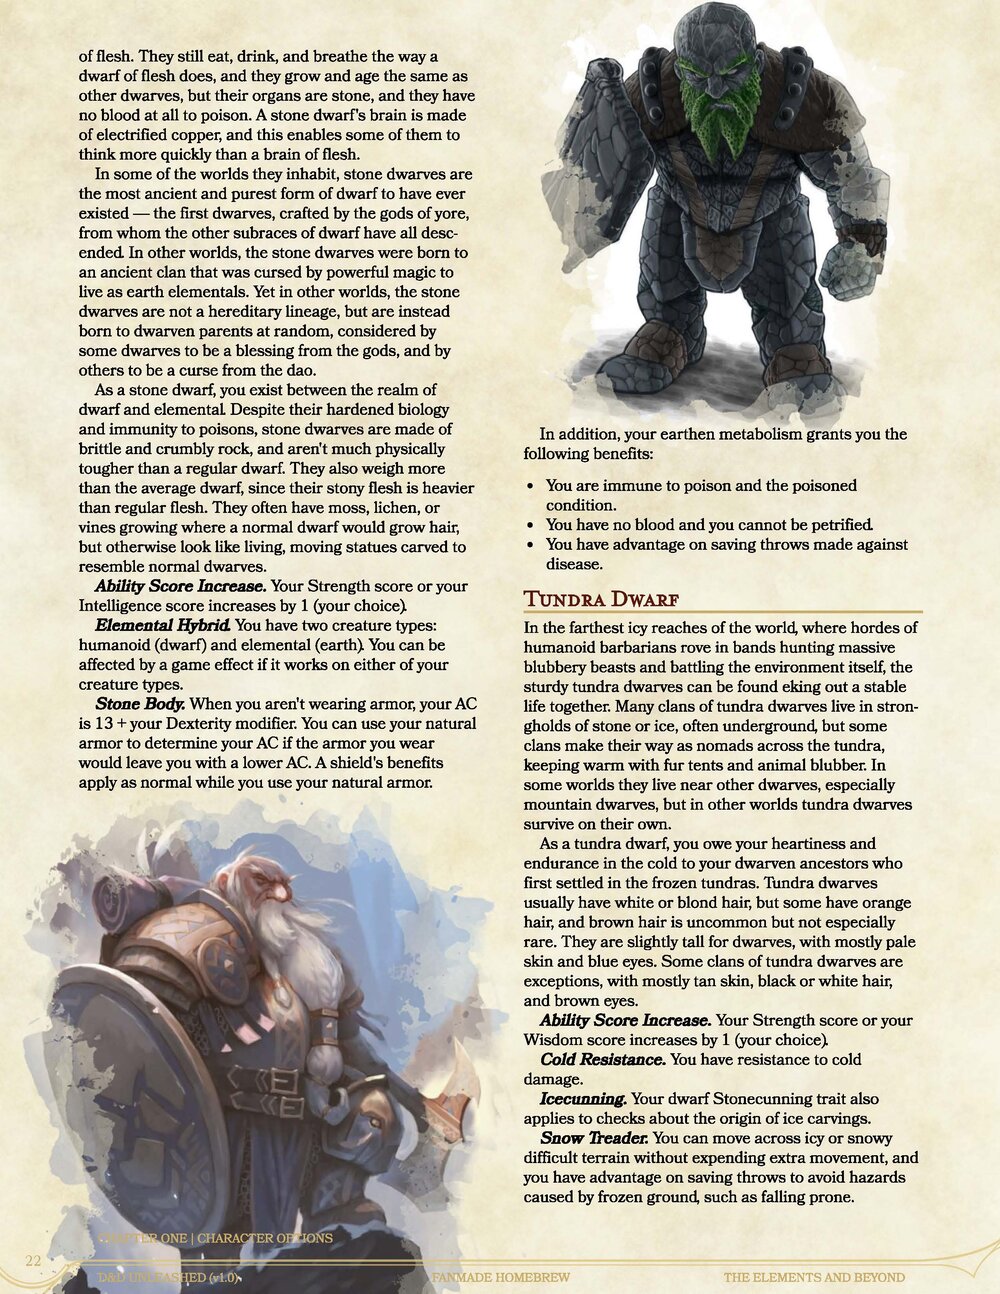 Homebrew material for 5e edition Dungeons and Dragons made by the  community.